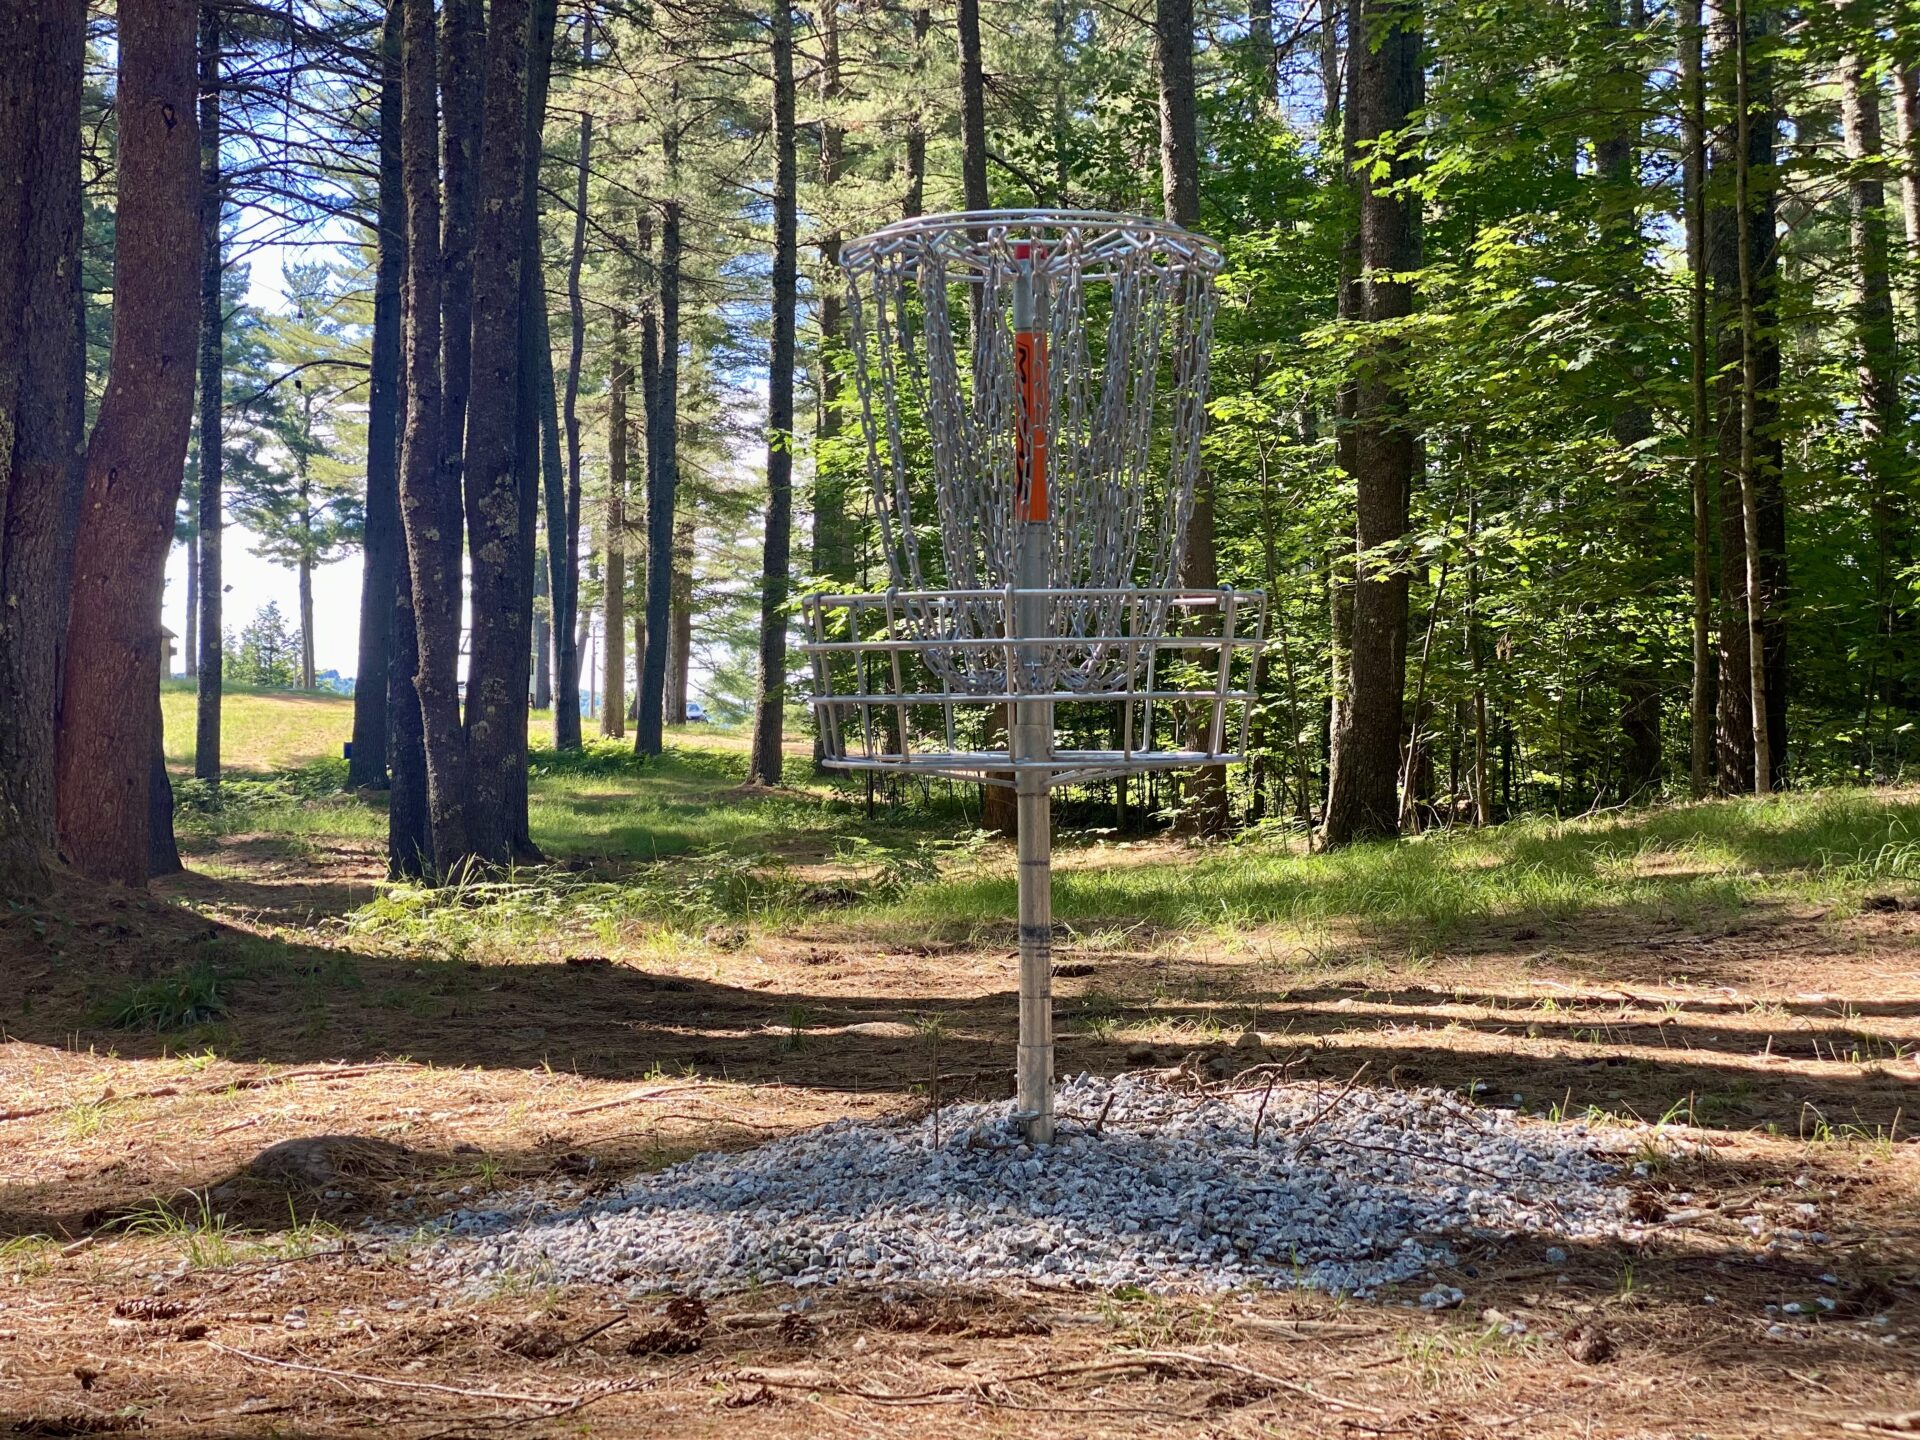 New 18-Hole Kings Mark Disc Golf Course Now Open!